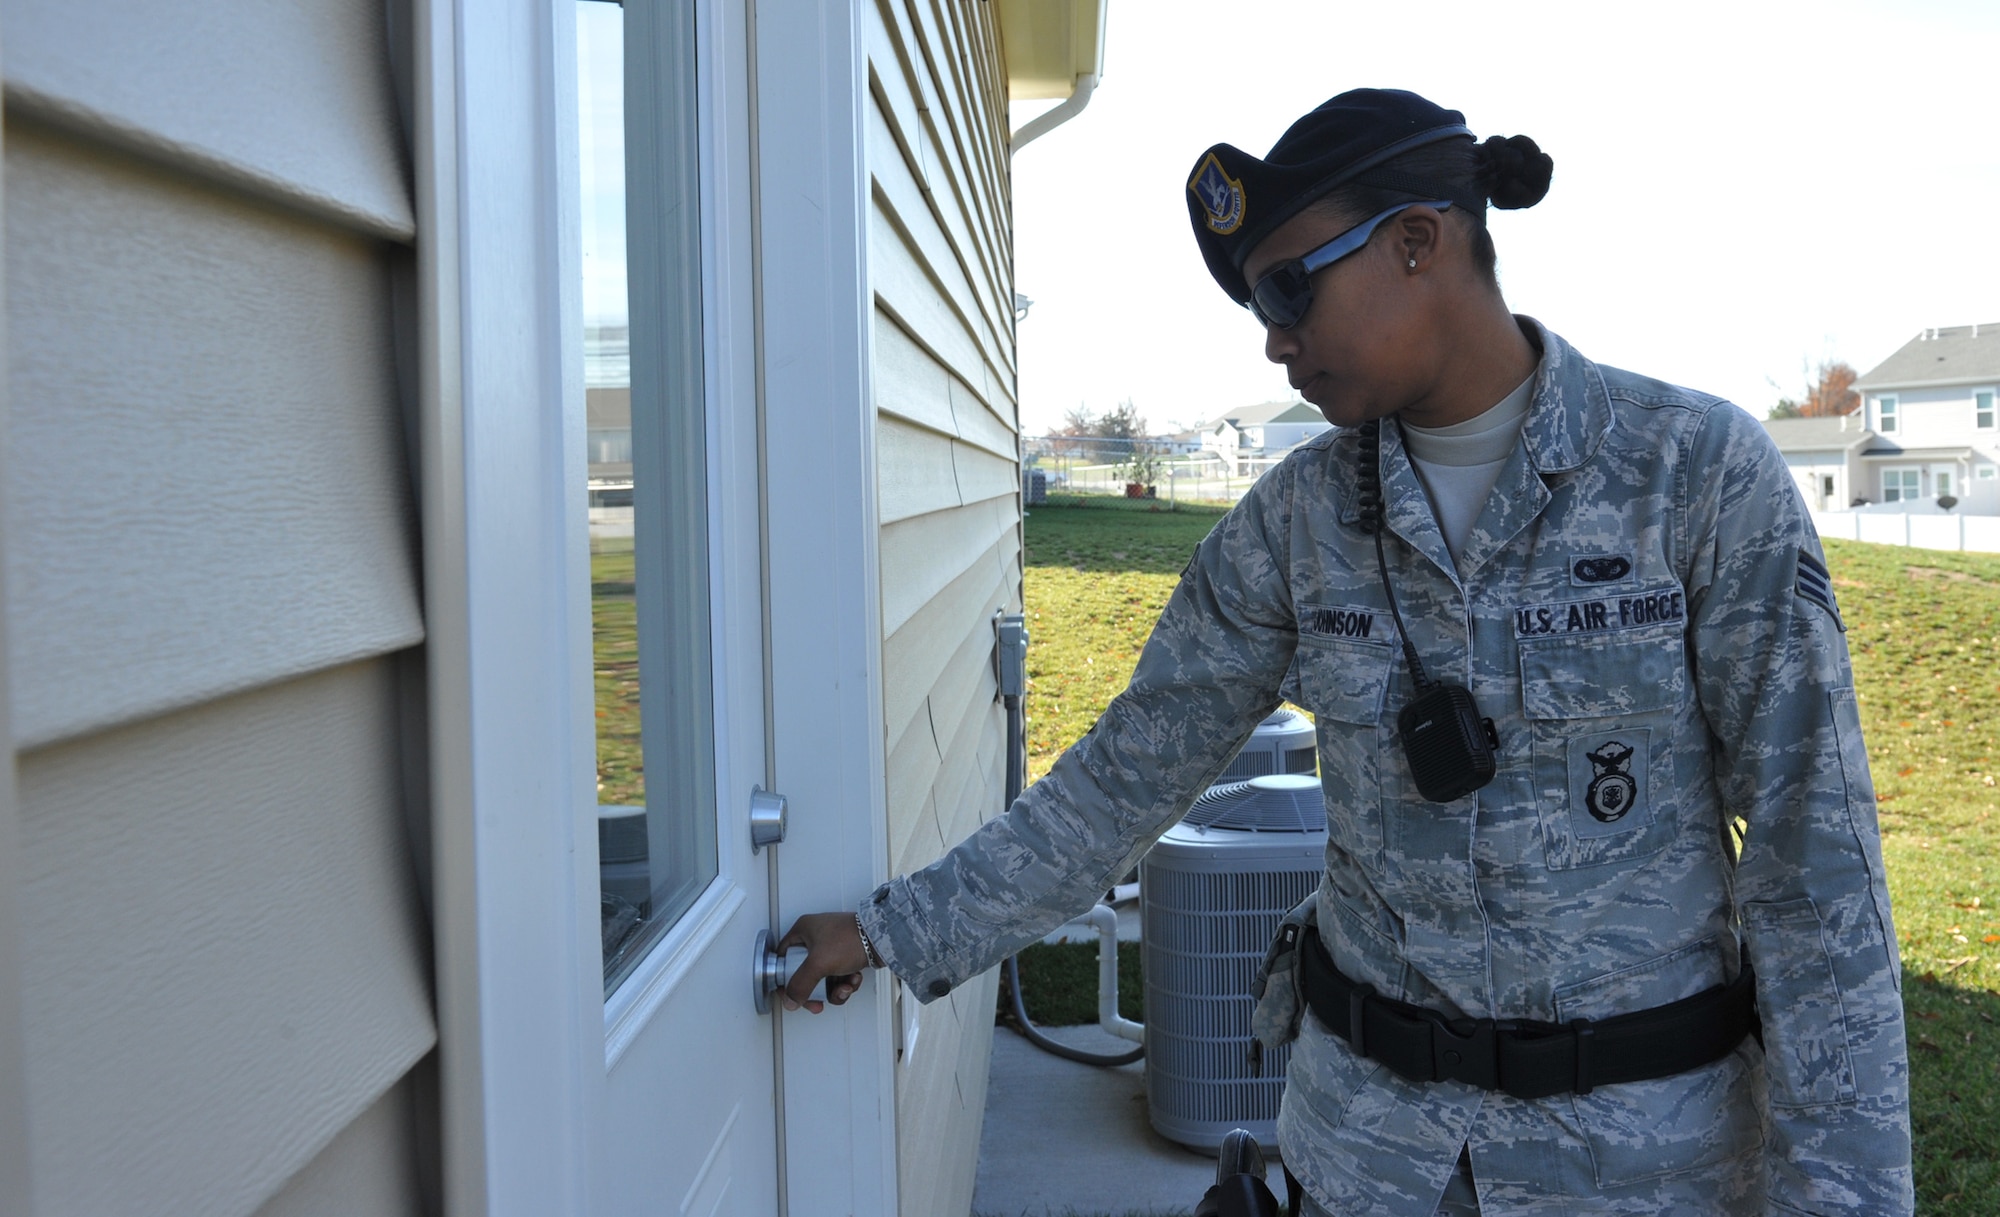 Senior Airman Keena Johnson, 509th Security Forces Squadron Law Enforcement, does an exterior check during her shift at Whiteman Air Force Base housing Nov. 13. As part of Operation Quarters Watch, the 509th SFS will physically check the resident's home to ensure all doors and windows are locked, secure, and that there is no damage. (U.S. Air Force photo/Heidi Hunt) (Released)